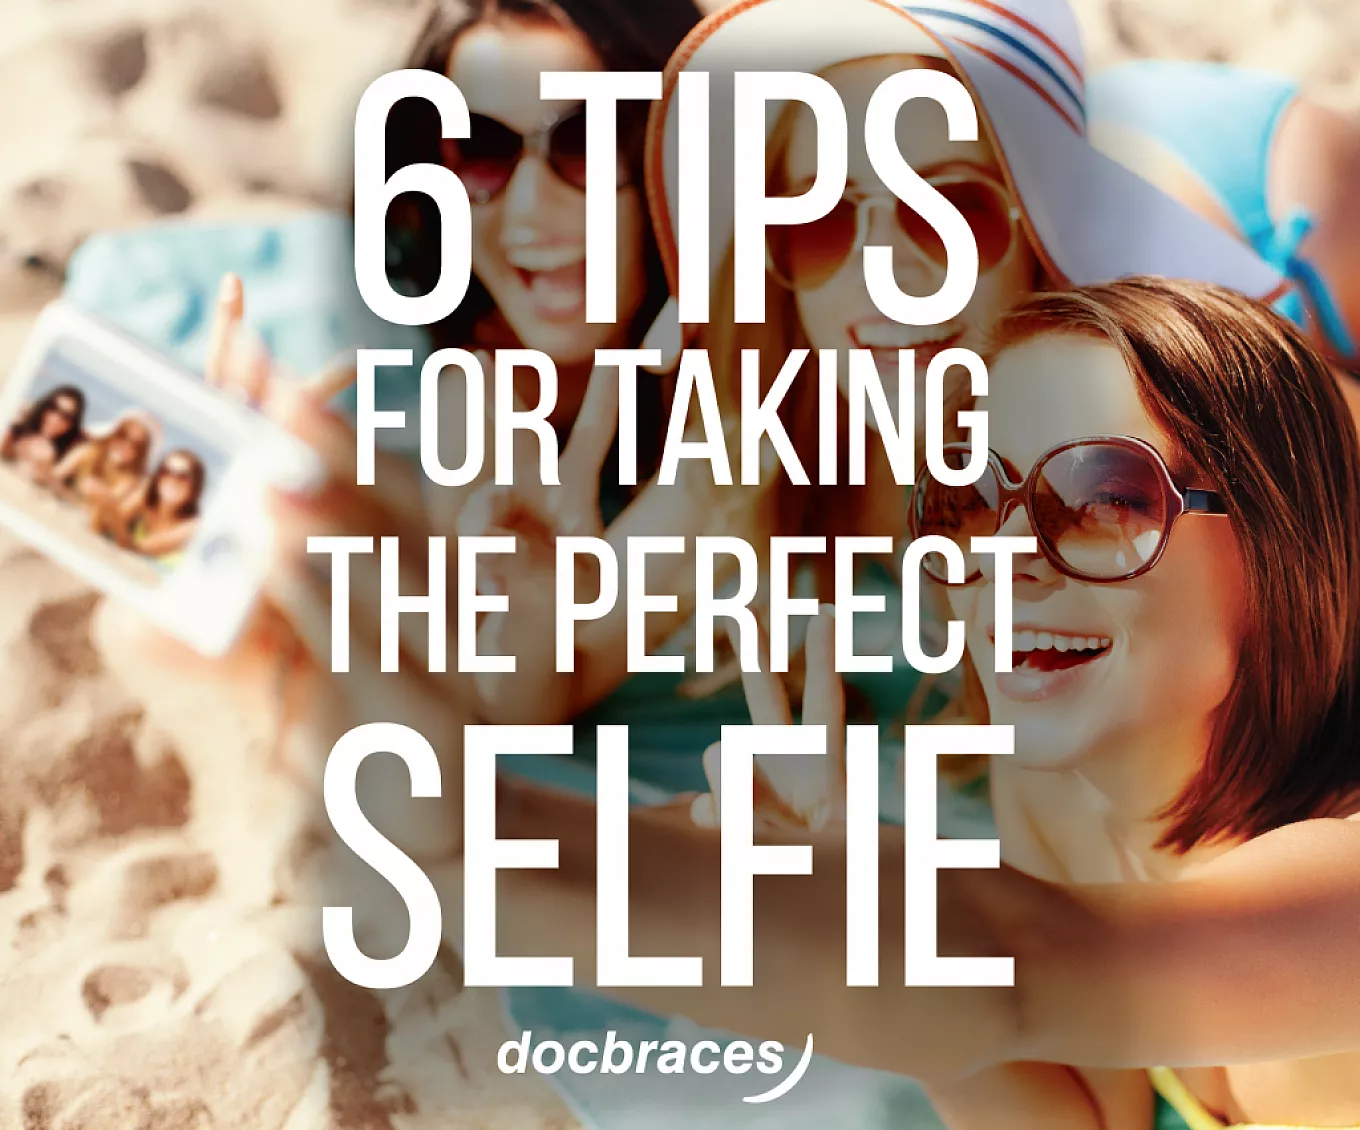 Six Tips for Taking The Perfect Selfie